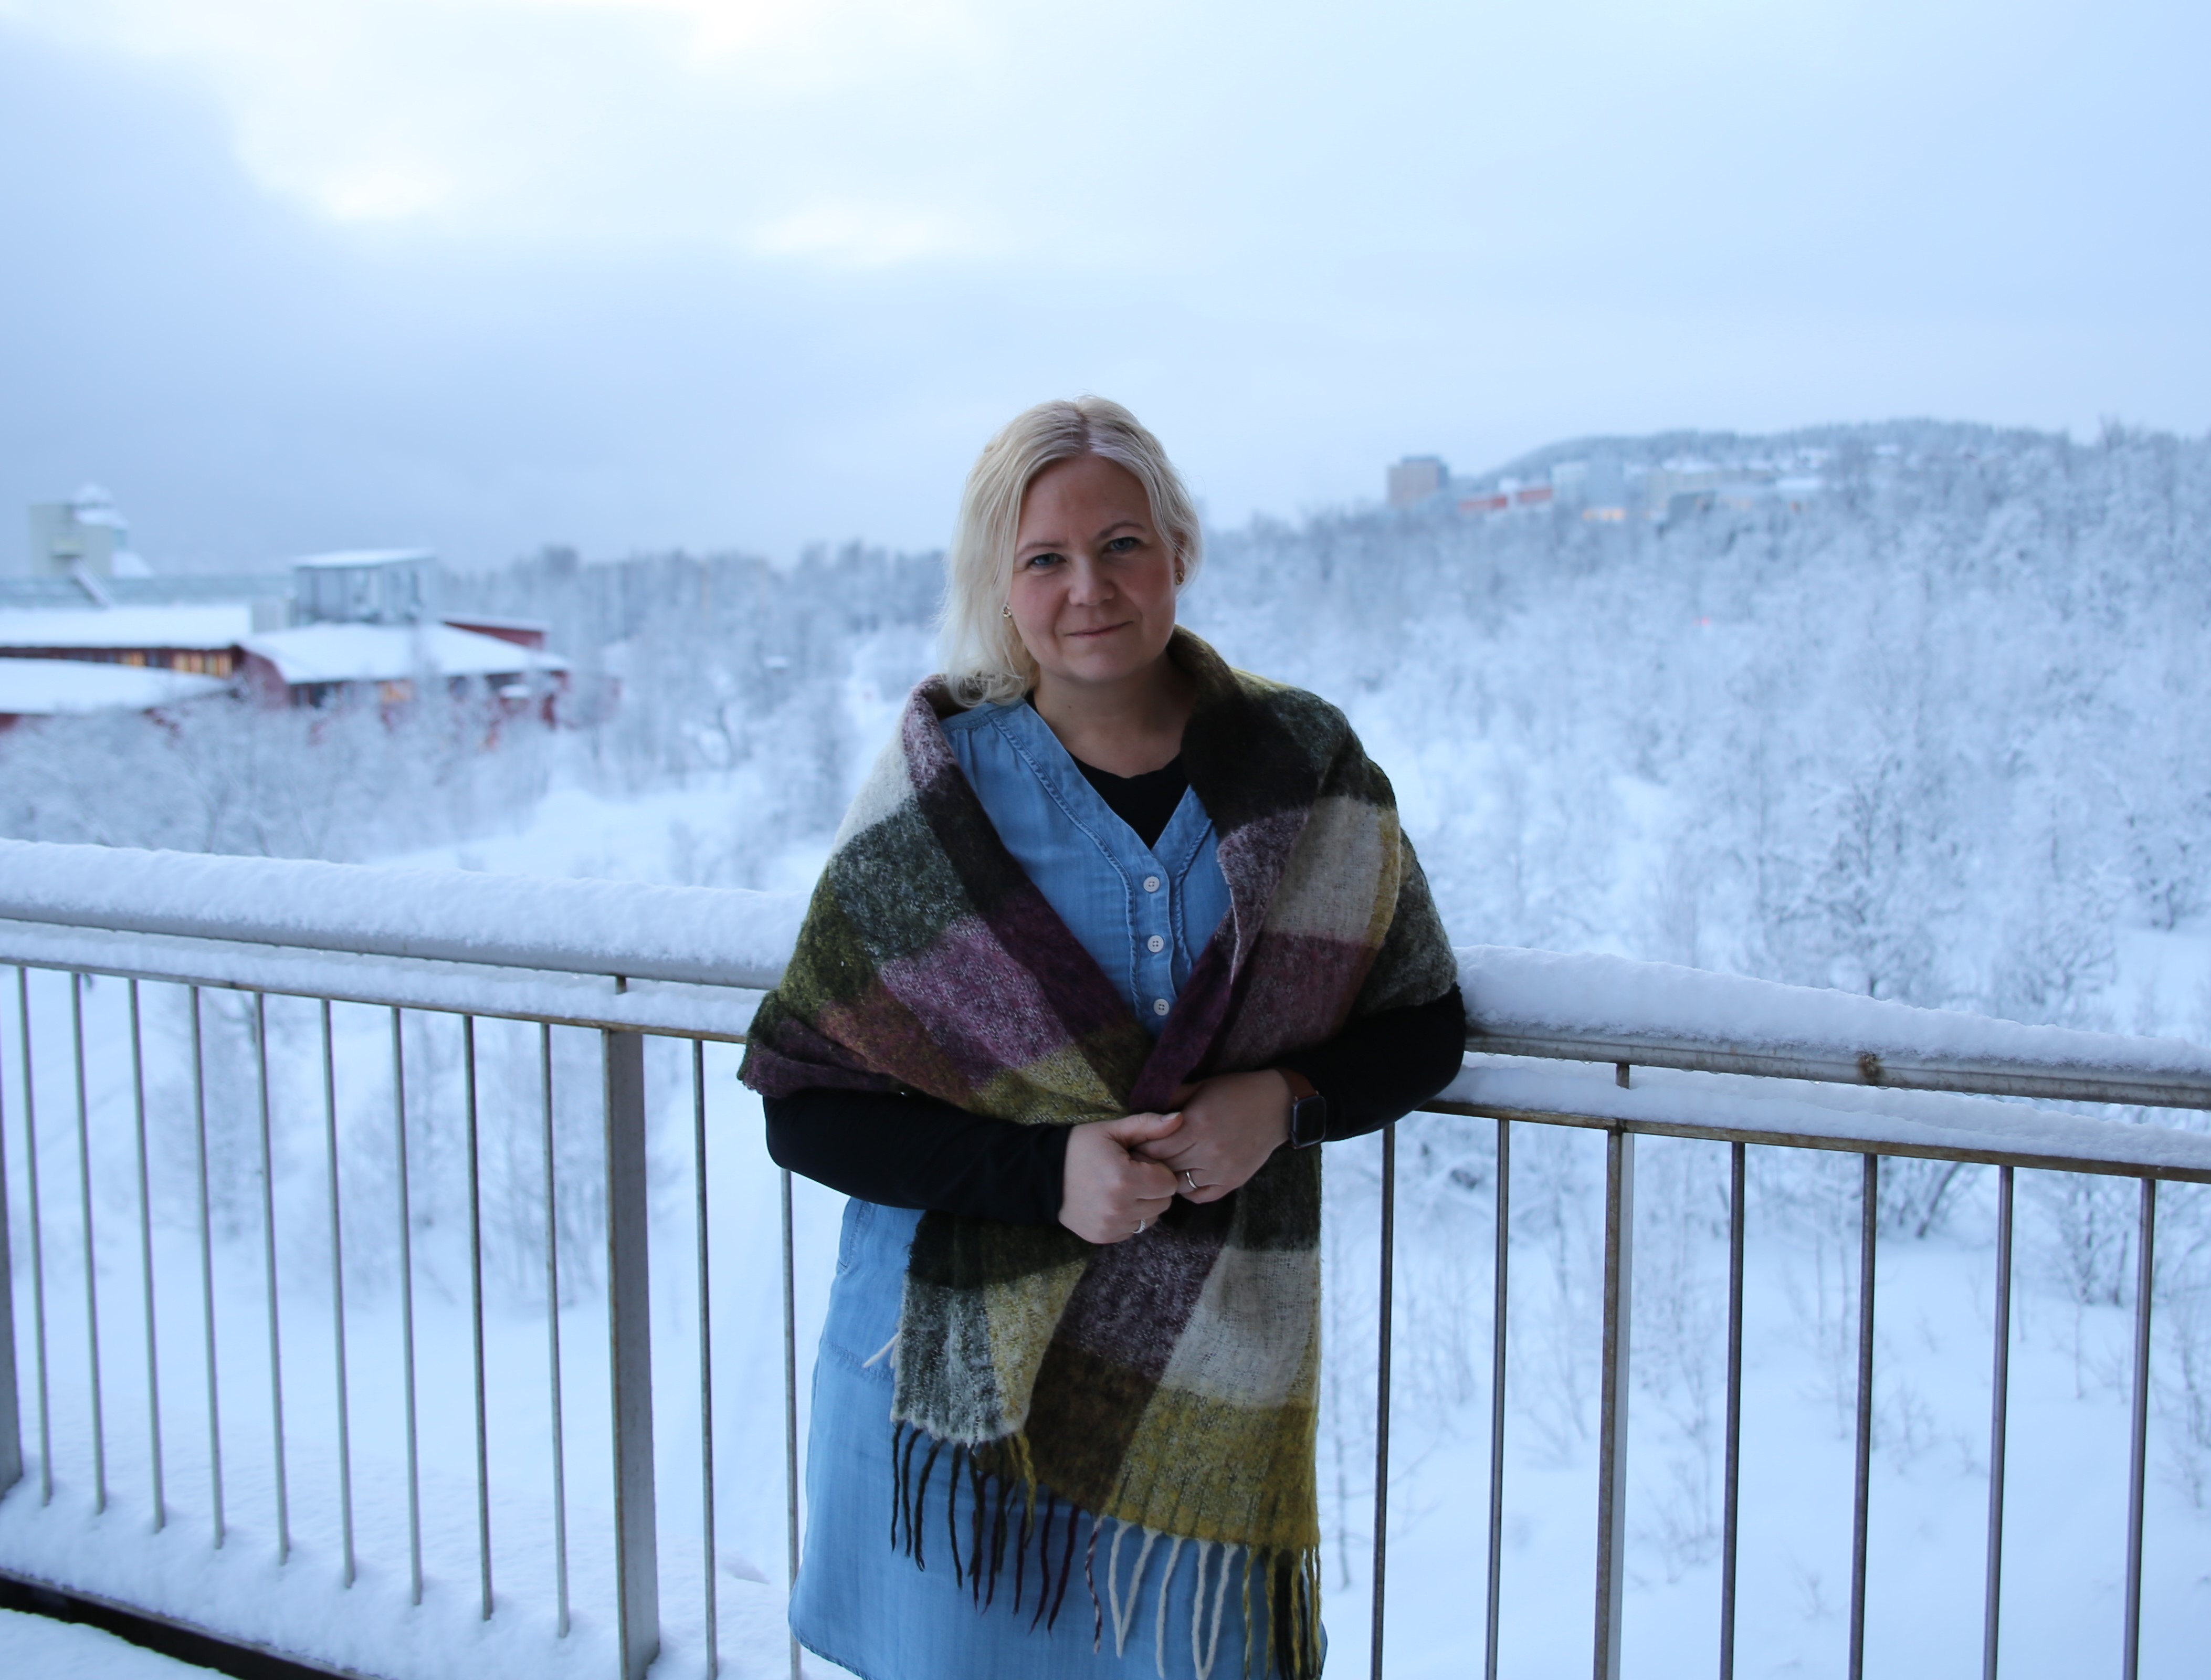 Professor Jakobsen posing outside in the winter, even though it appears to be cold, she does not appear to be freezing...